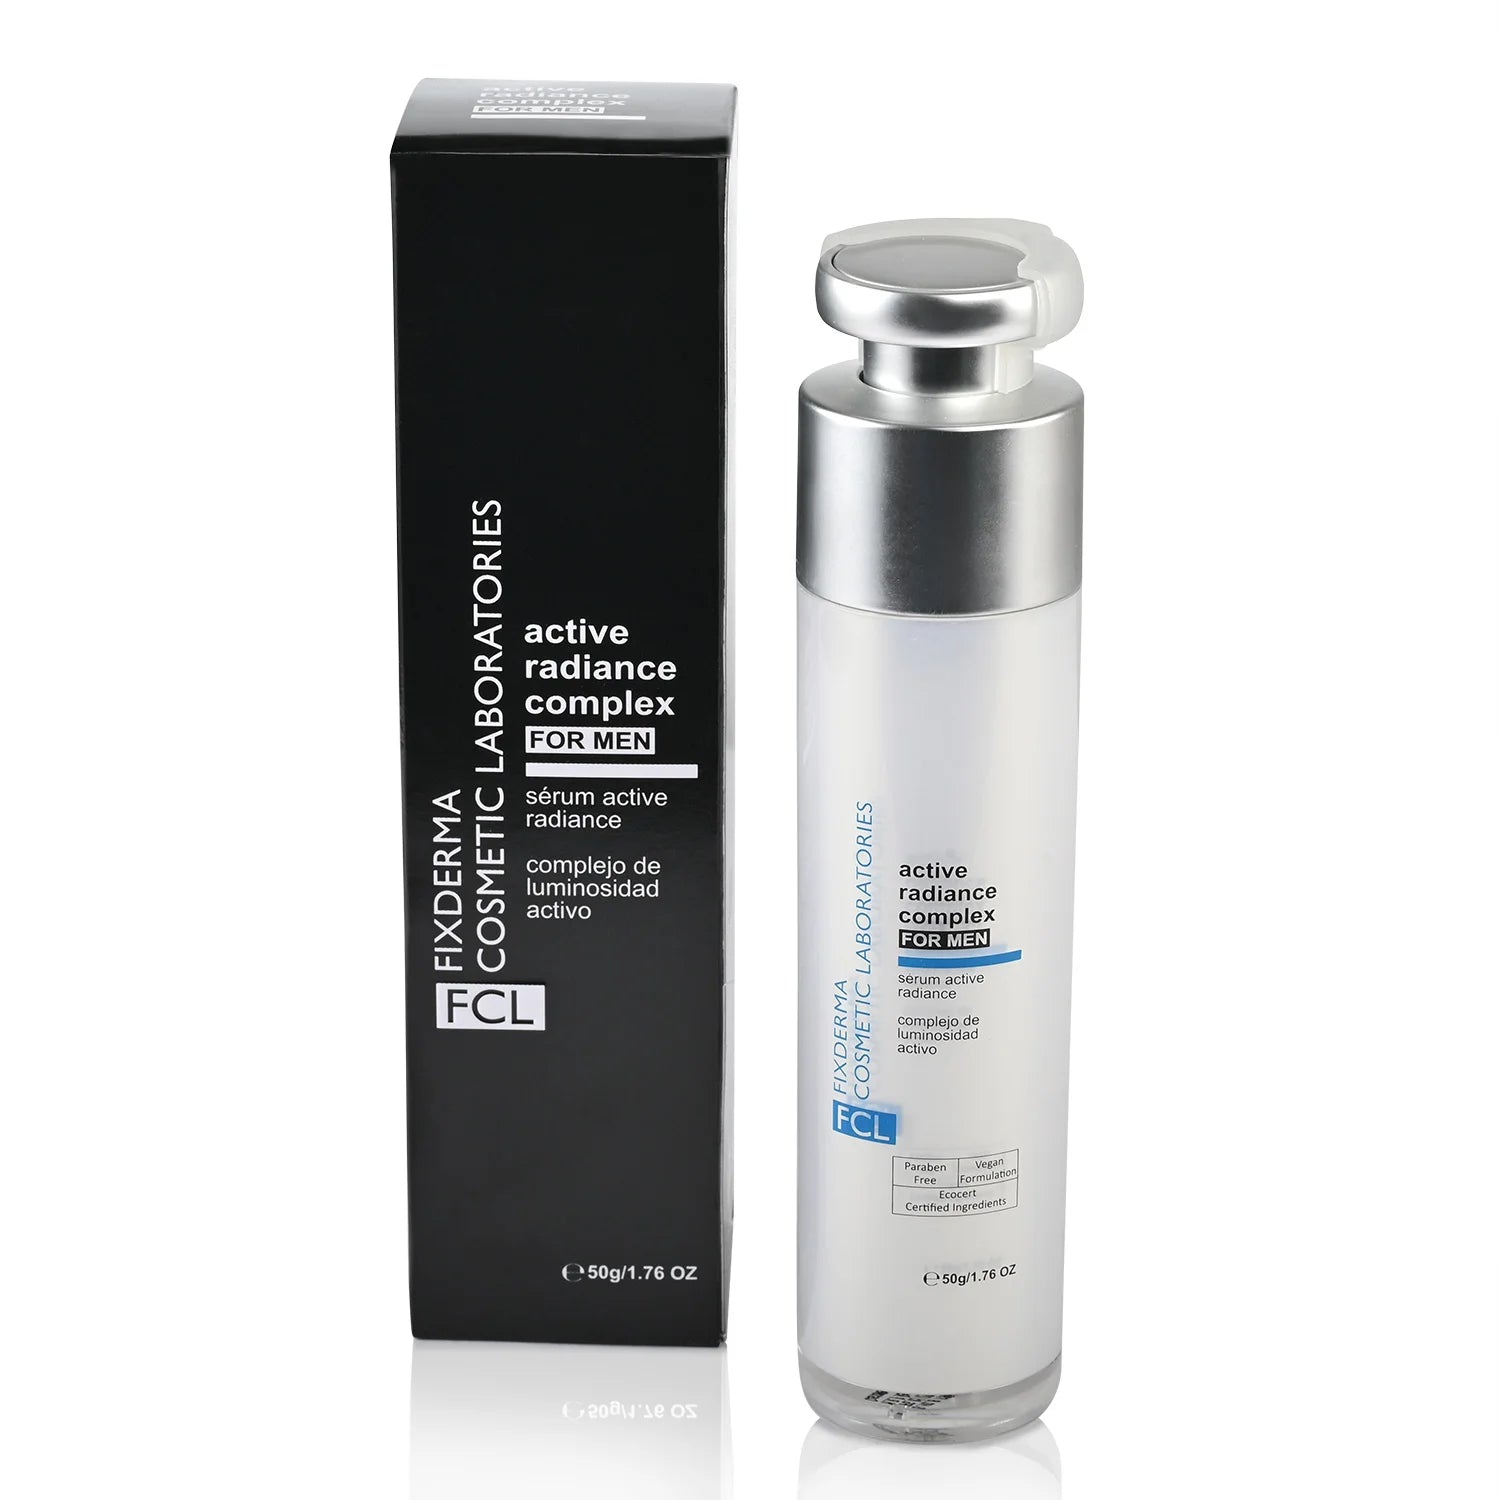 Fcl active radiance complex